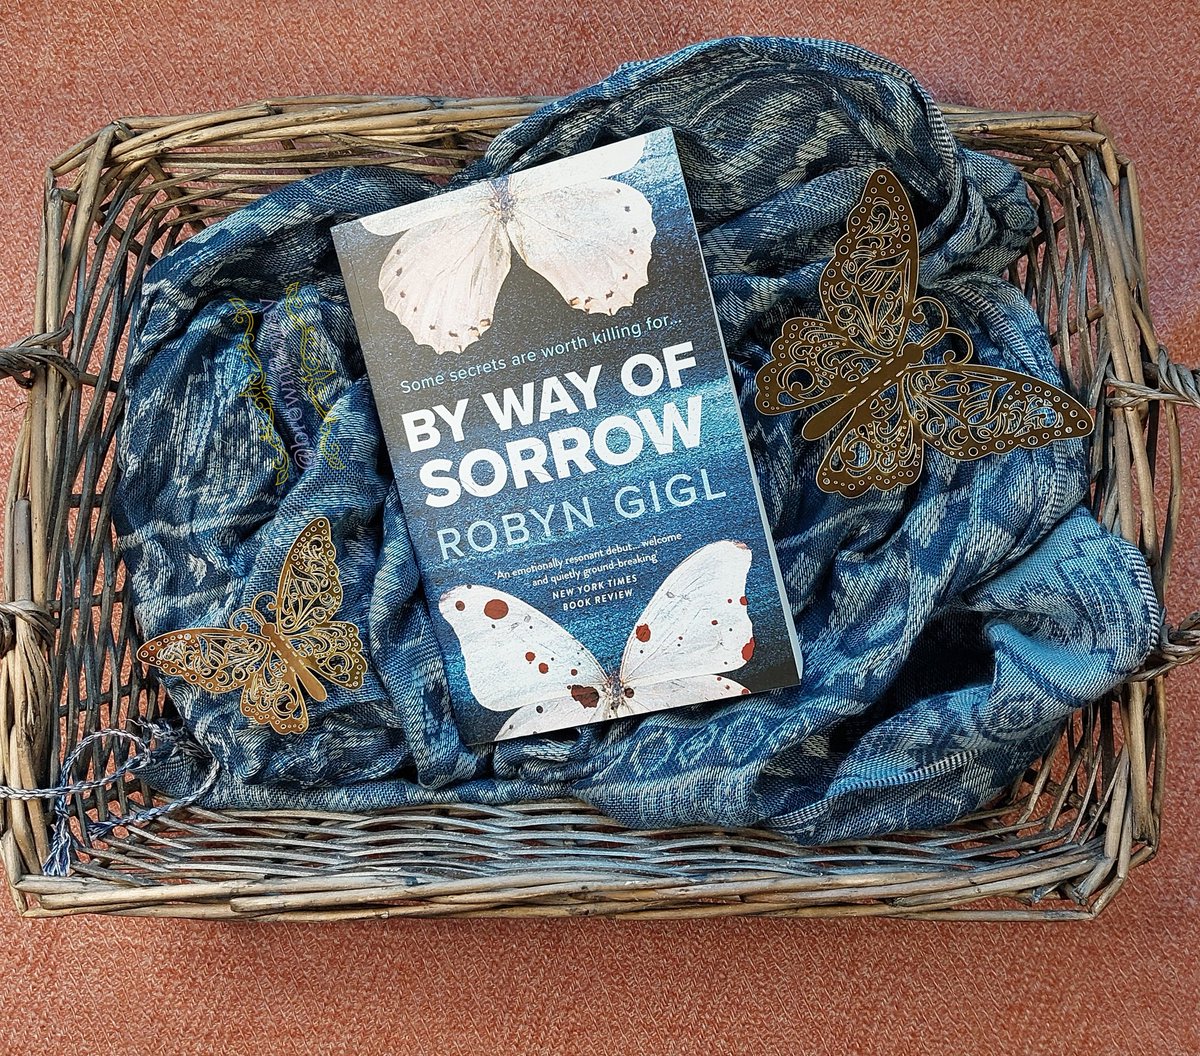 Thank you @VERVE_Books for sending me a proof of #ByWayOfSorrow by Robin Gigl, which sounds so good! Coming 16th March 2023! 🤩